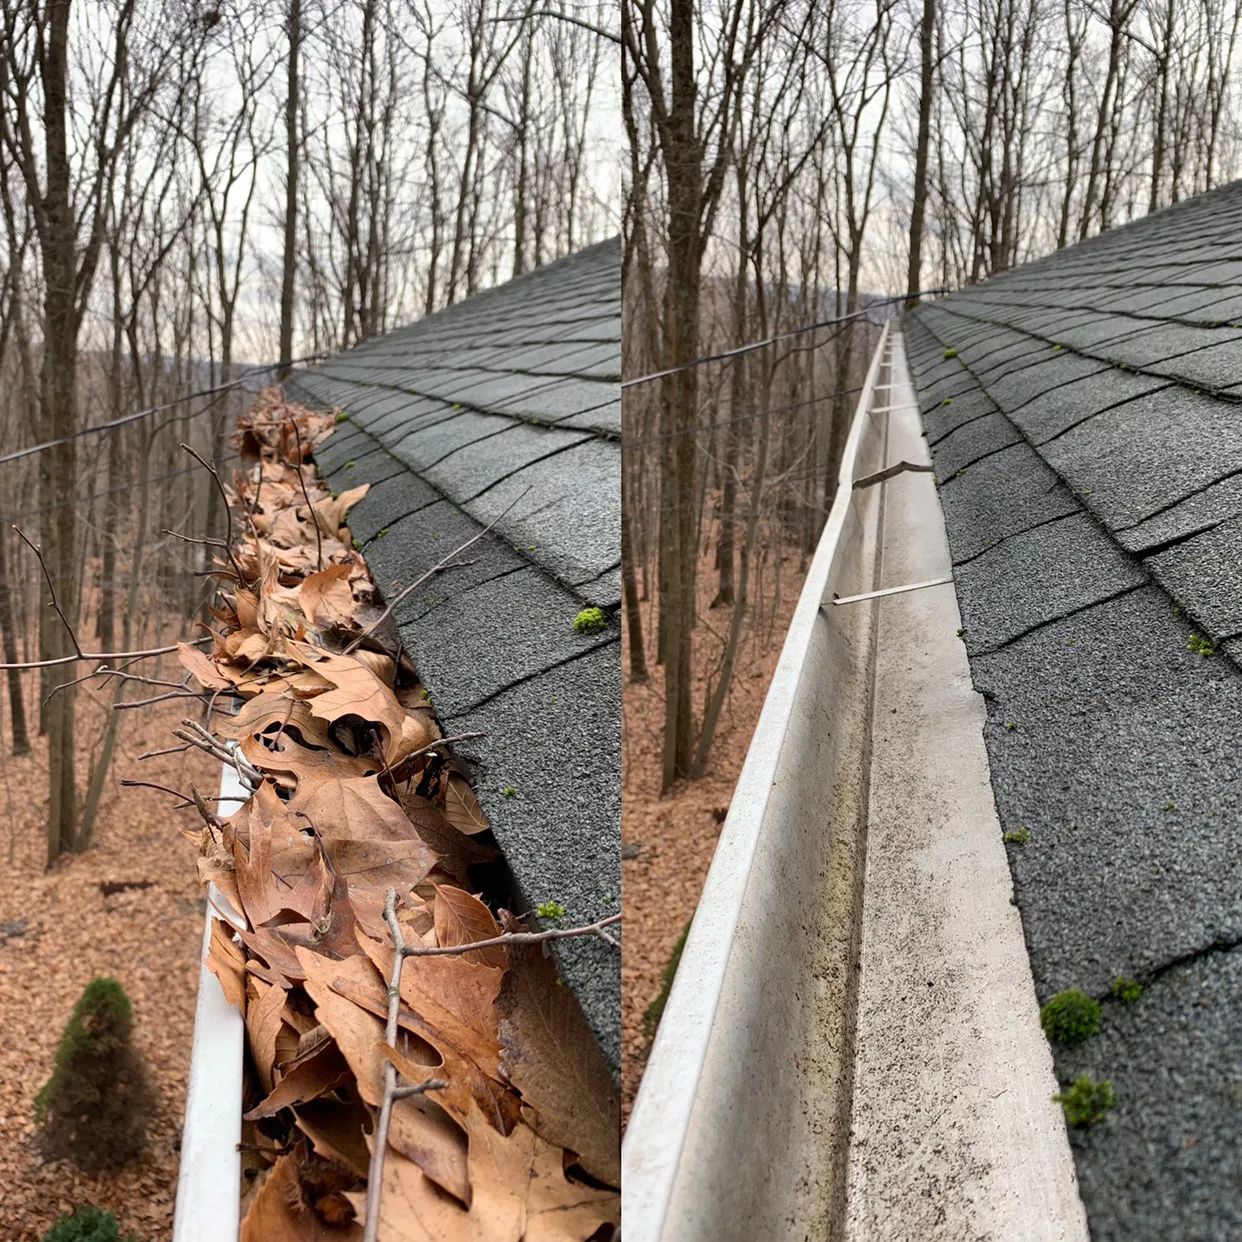 2022 Gutter Cleaning Cost | How Much Is Gutter Cleaning?